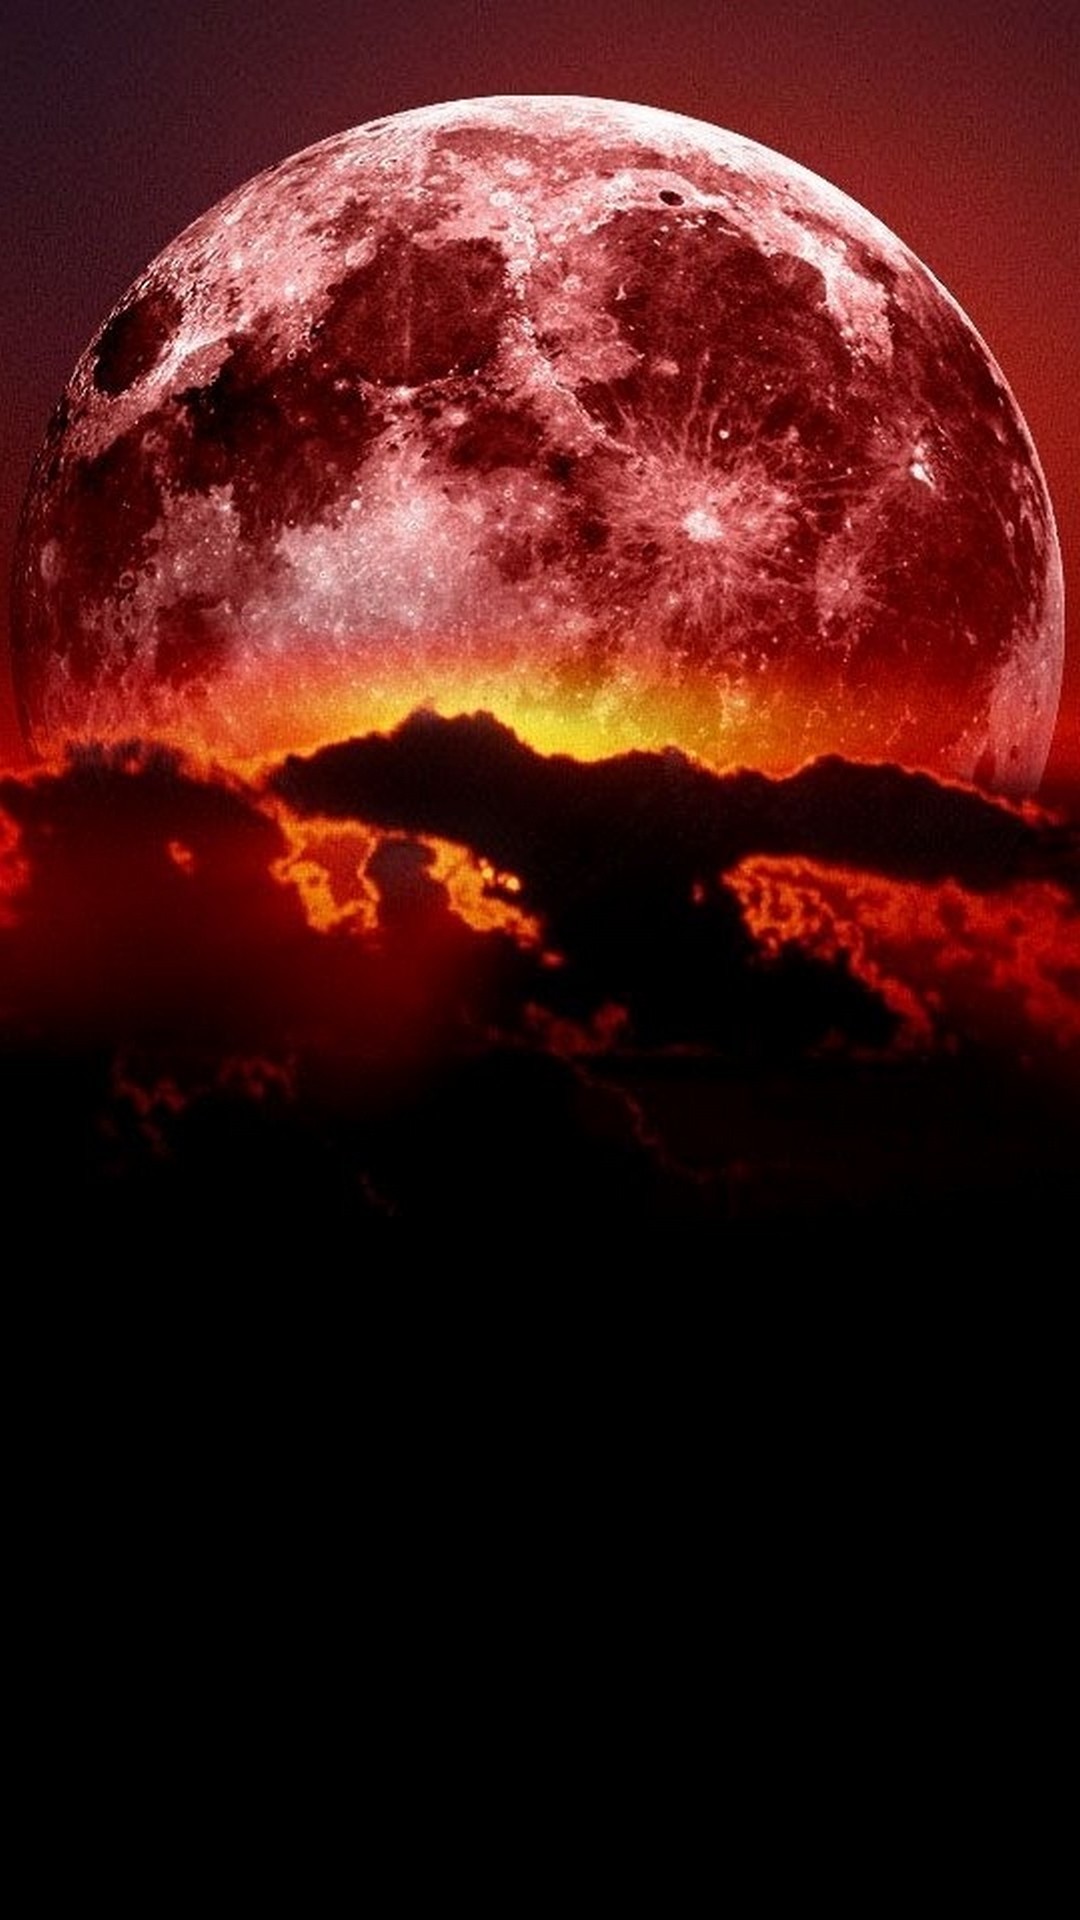 Super Blood Moon Wallpaper Android with HD resolution 1080x1920